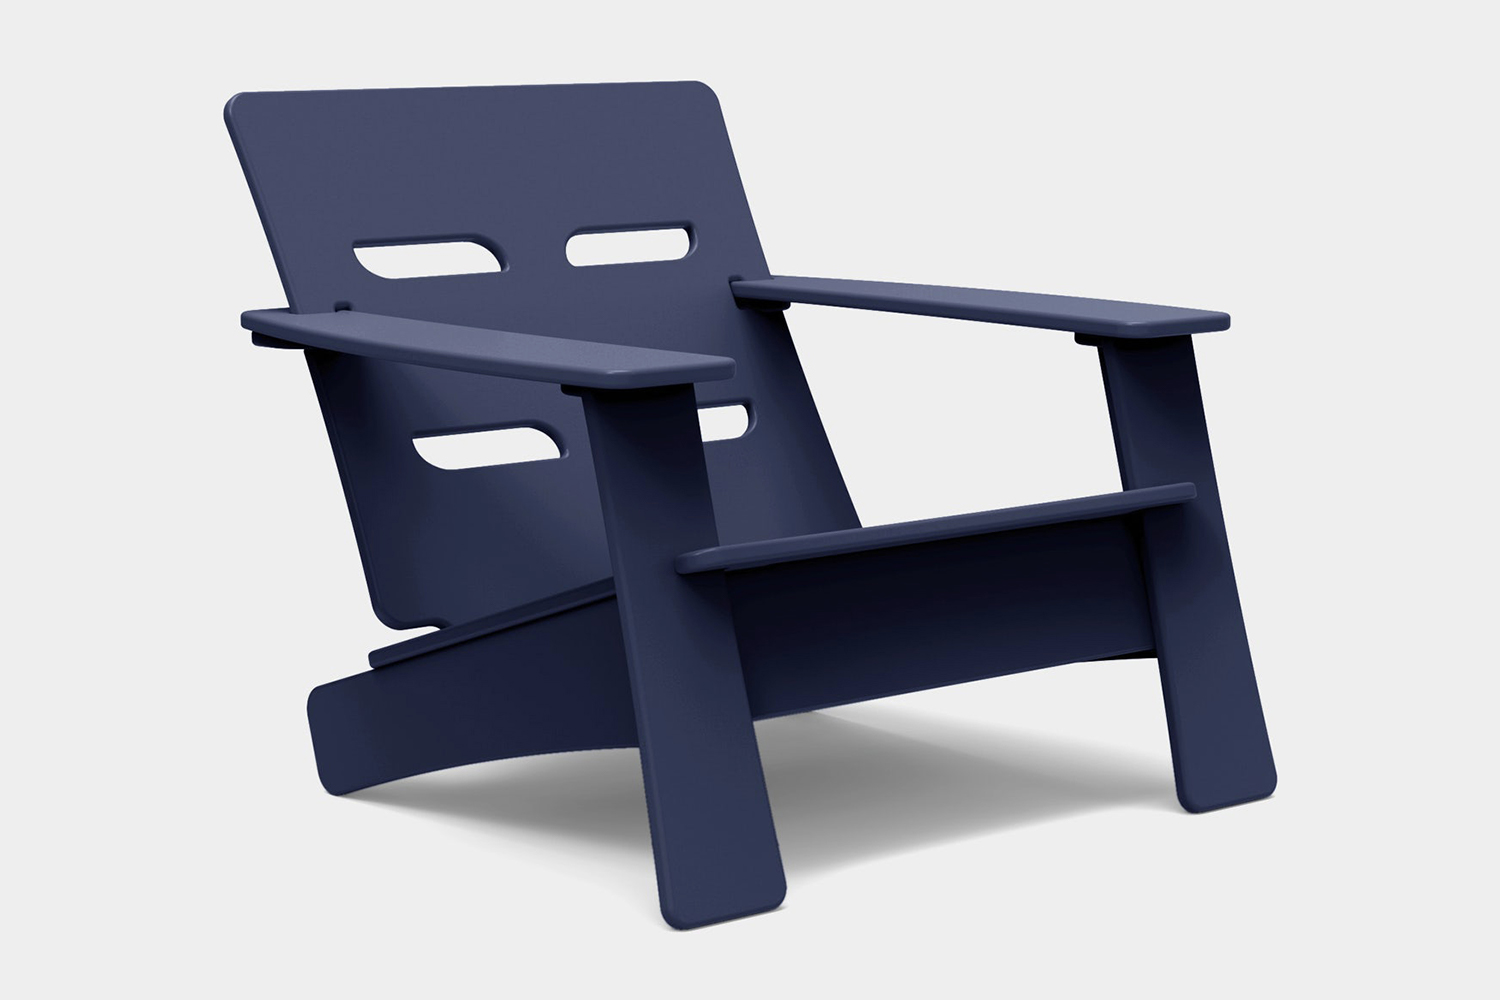 Cabrio Lounge Chair from Design Within Reach